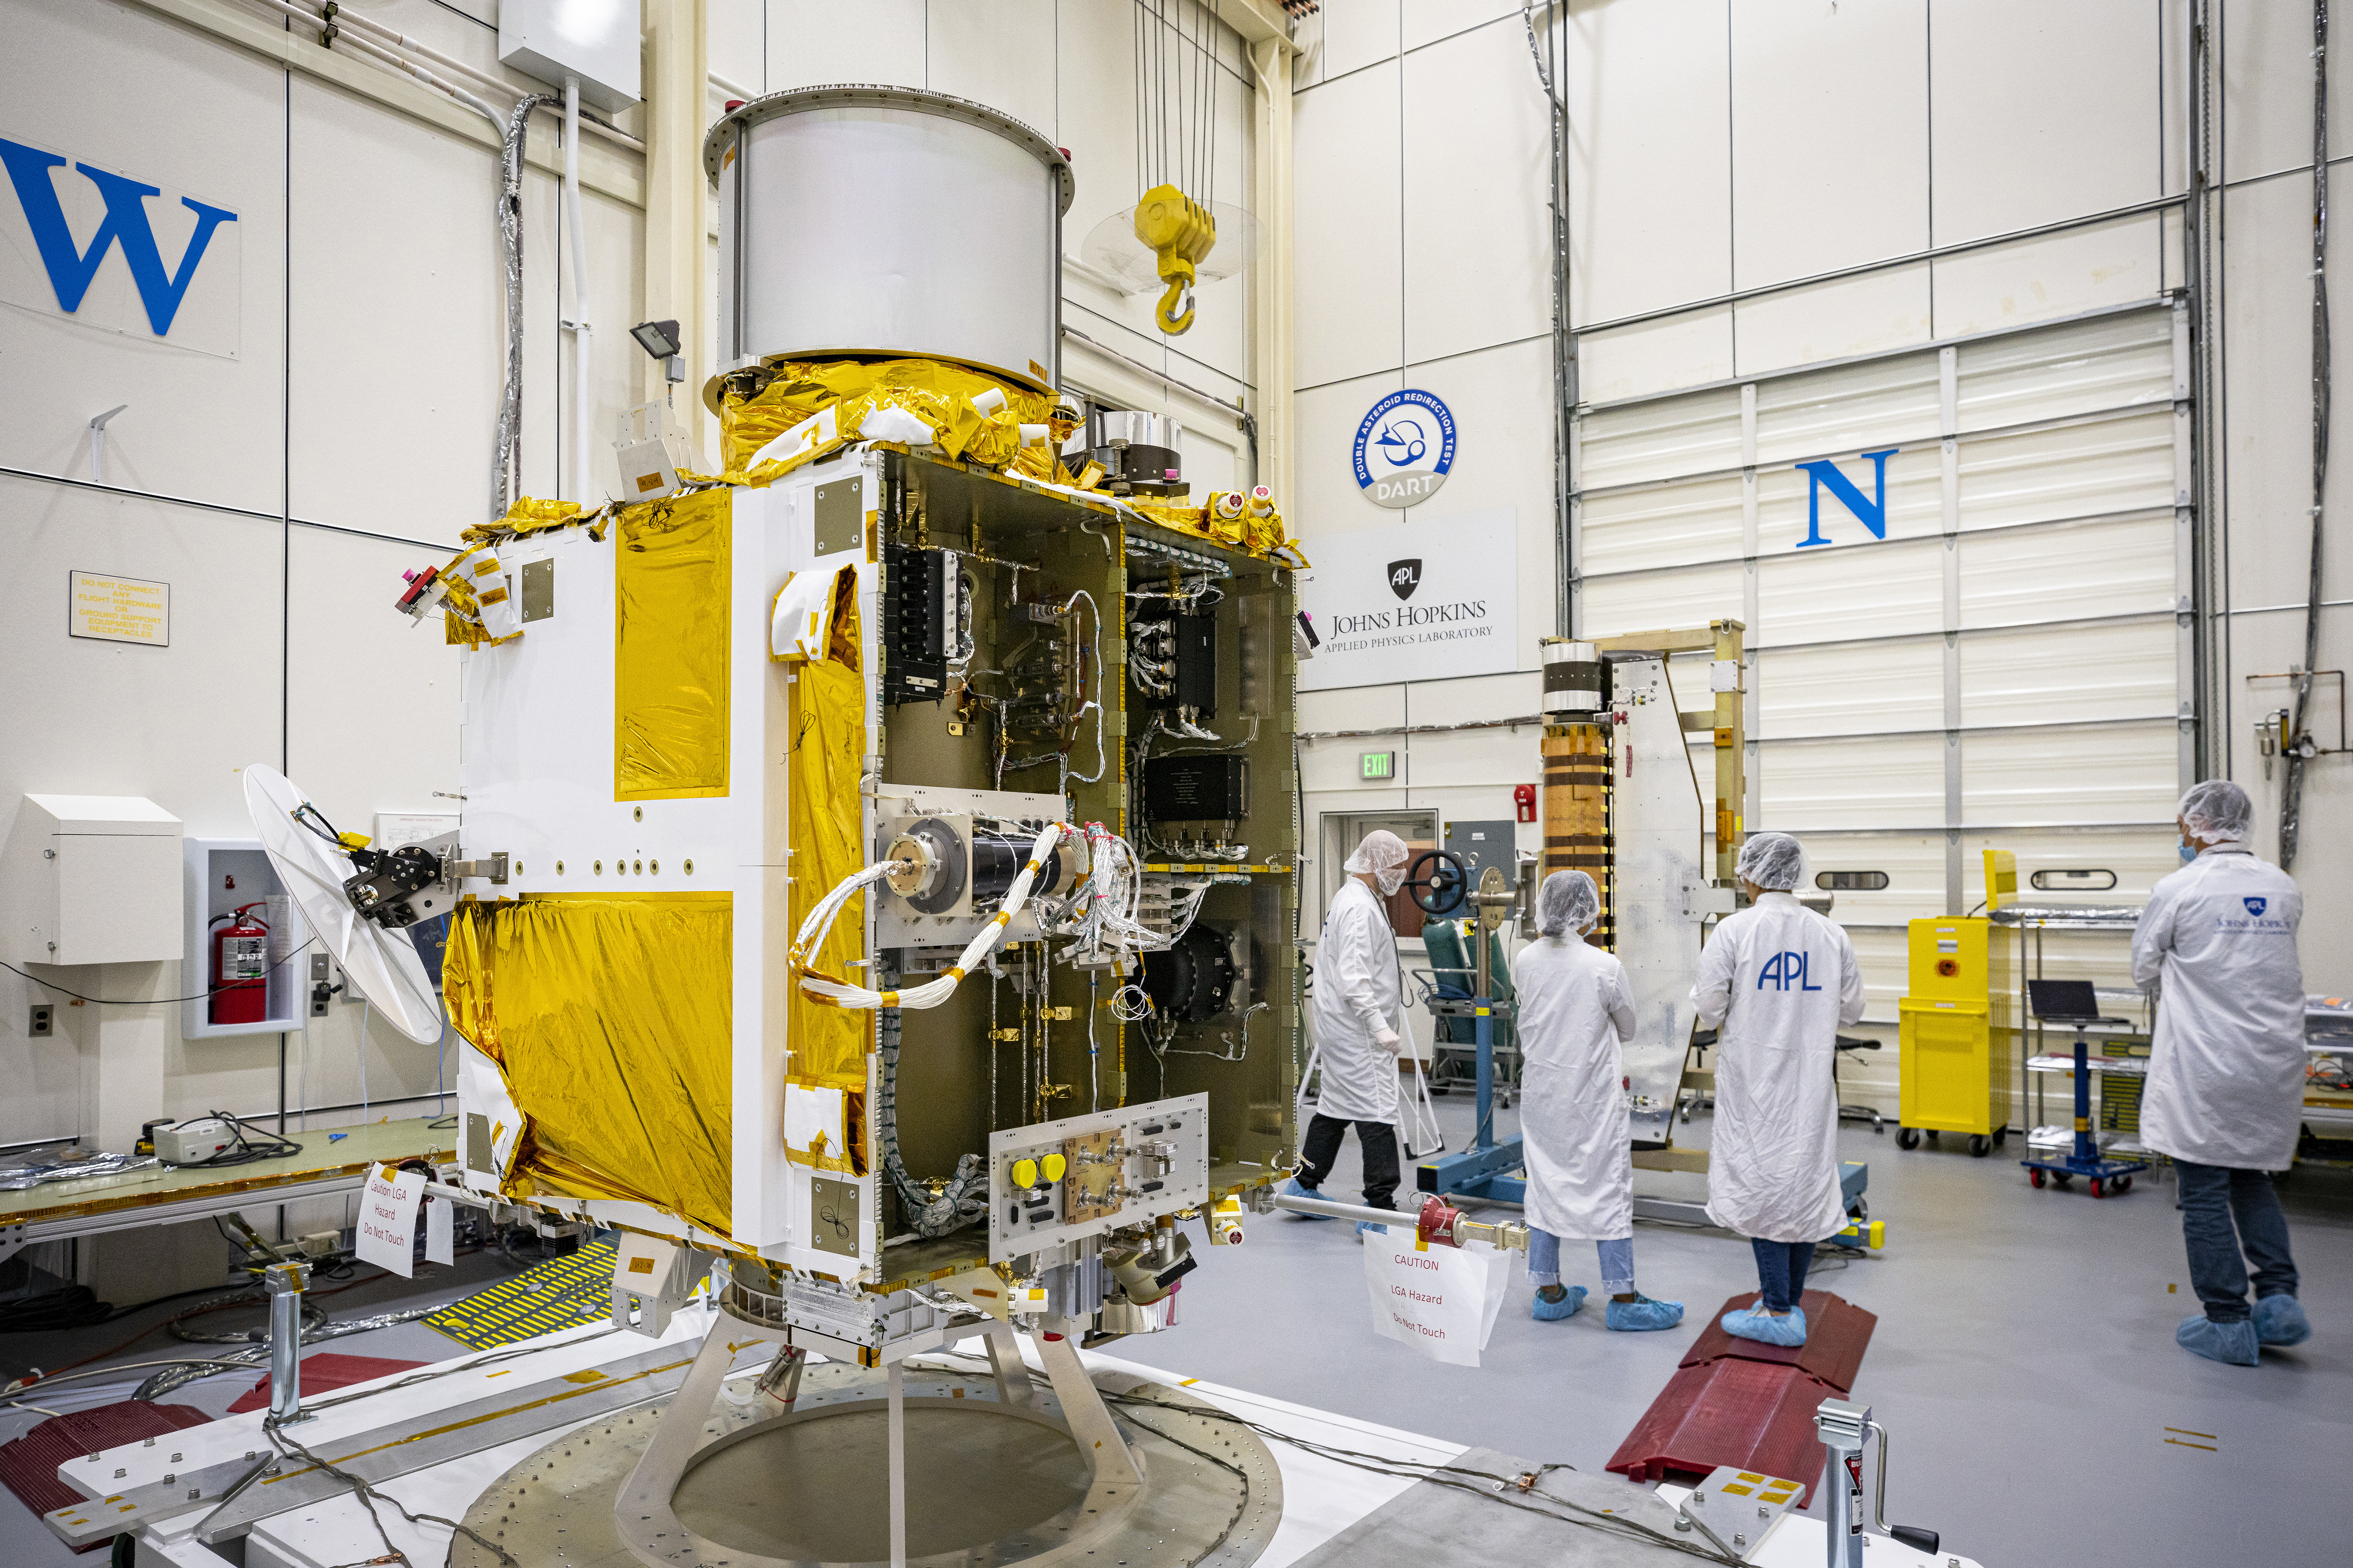 People in personal protective equipment stand next to the gold-foil-covered DART spacecraft